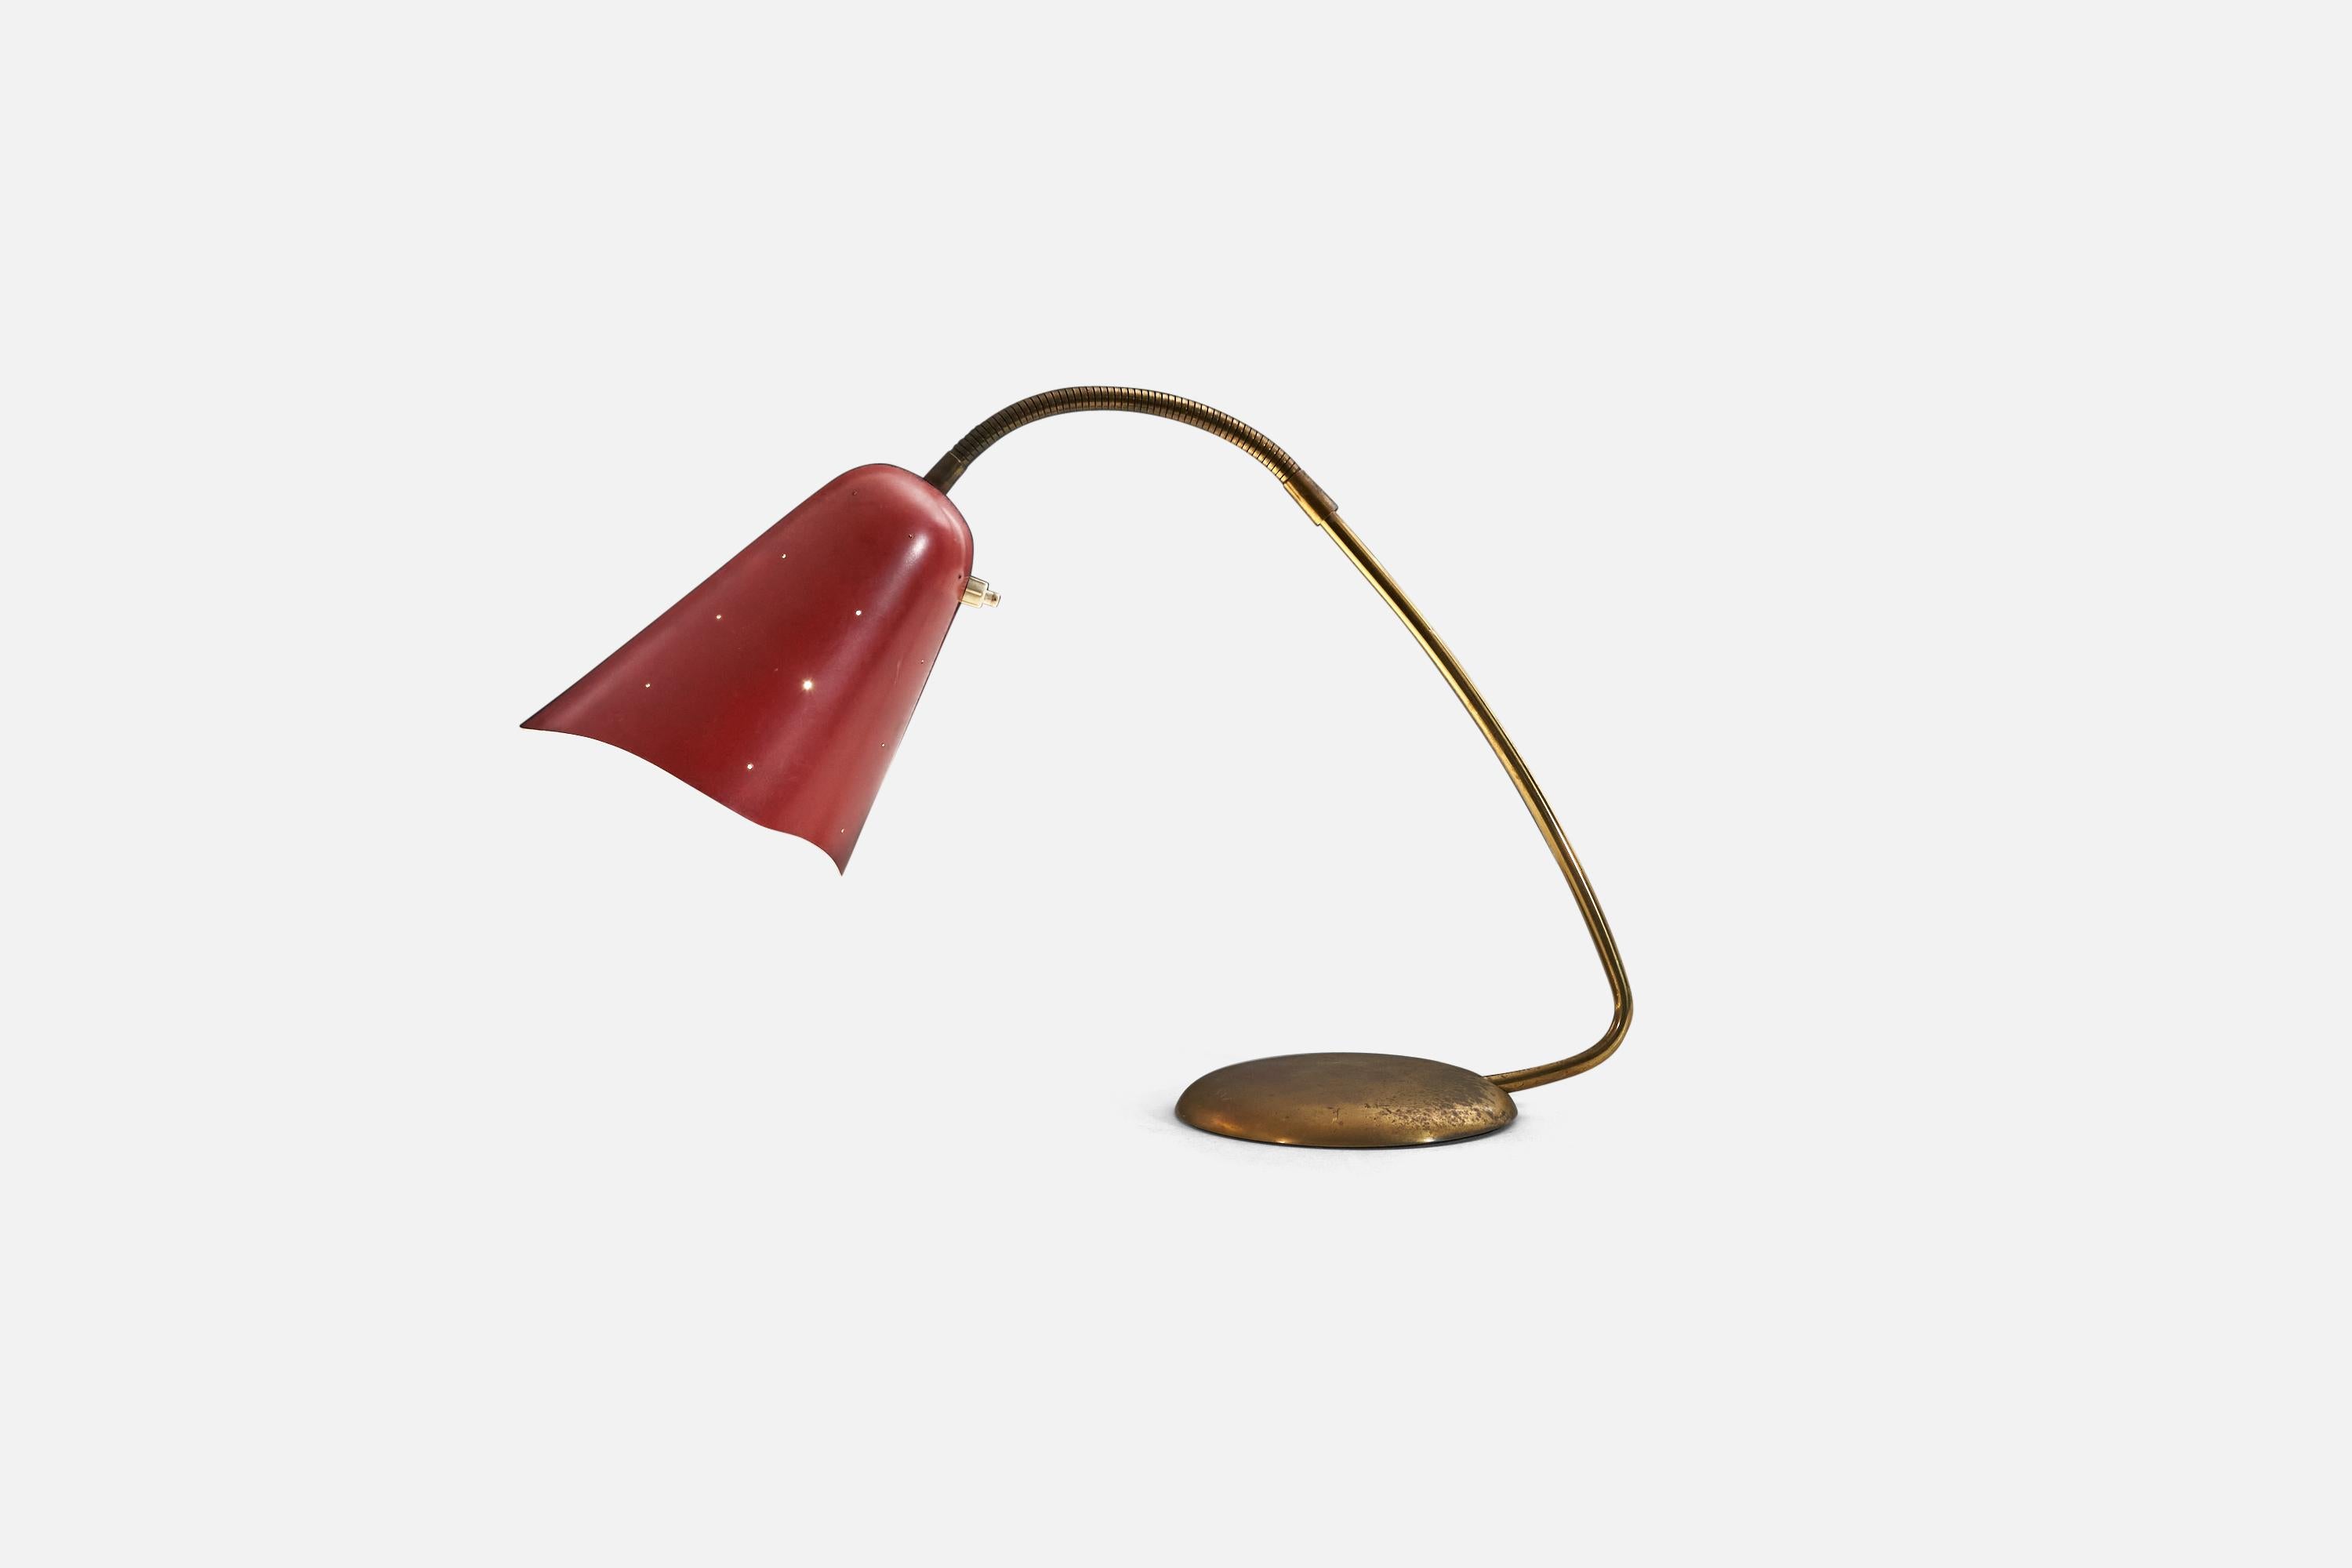 A brass and red-lacquered metal table lamp designed and produced by Svend Aage Holm Sørensen, Denmark, 1950s.